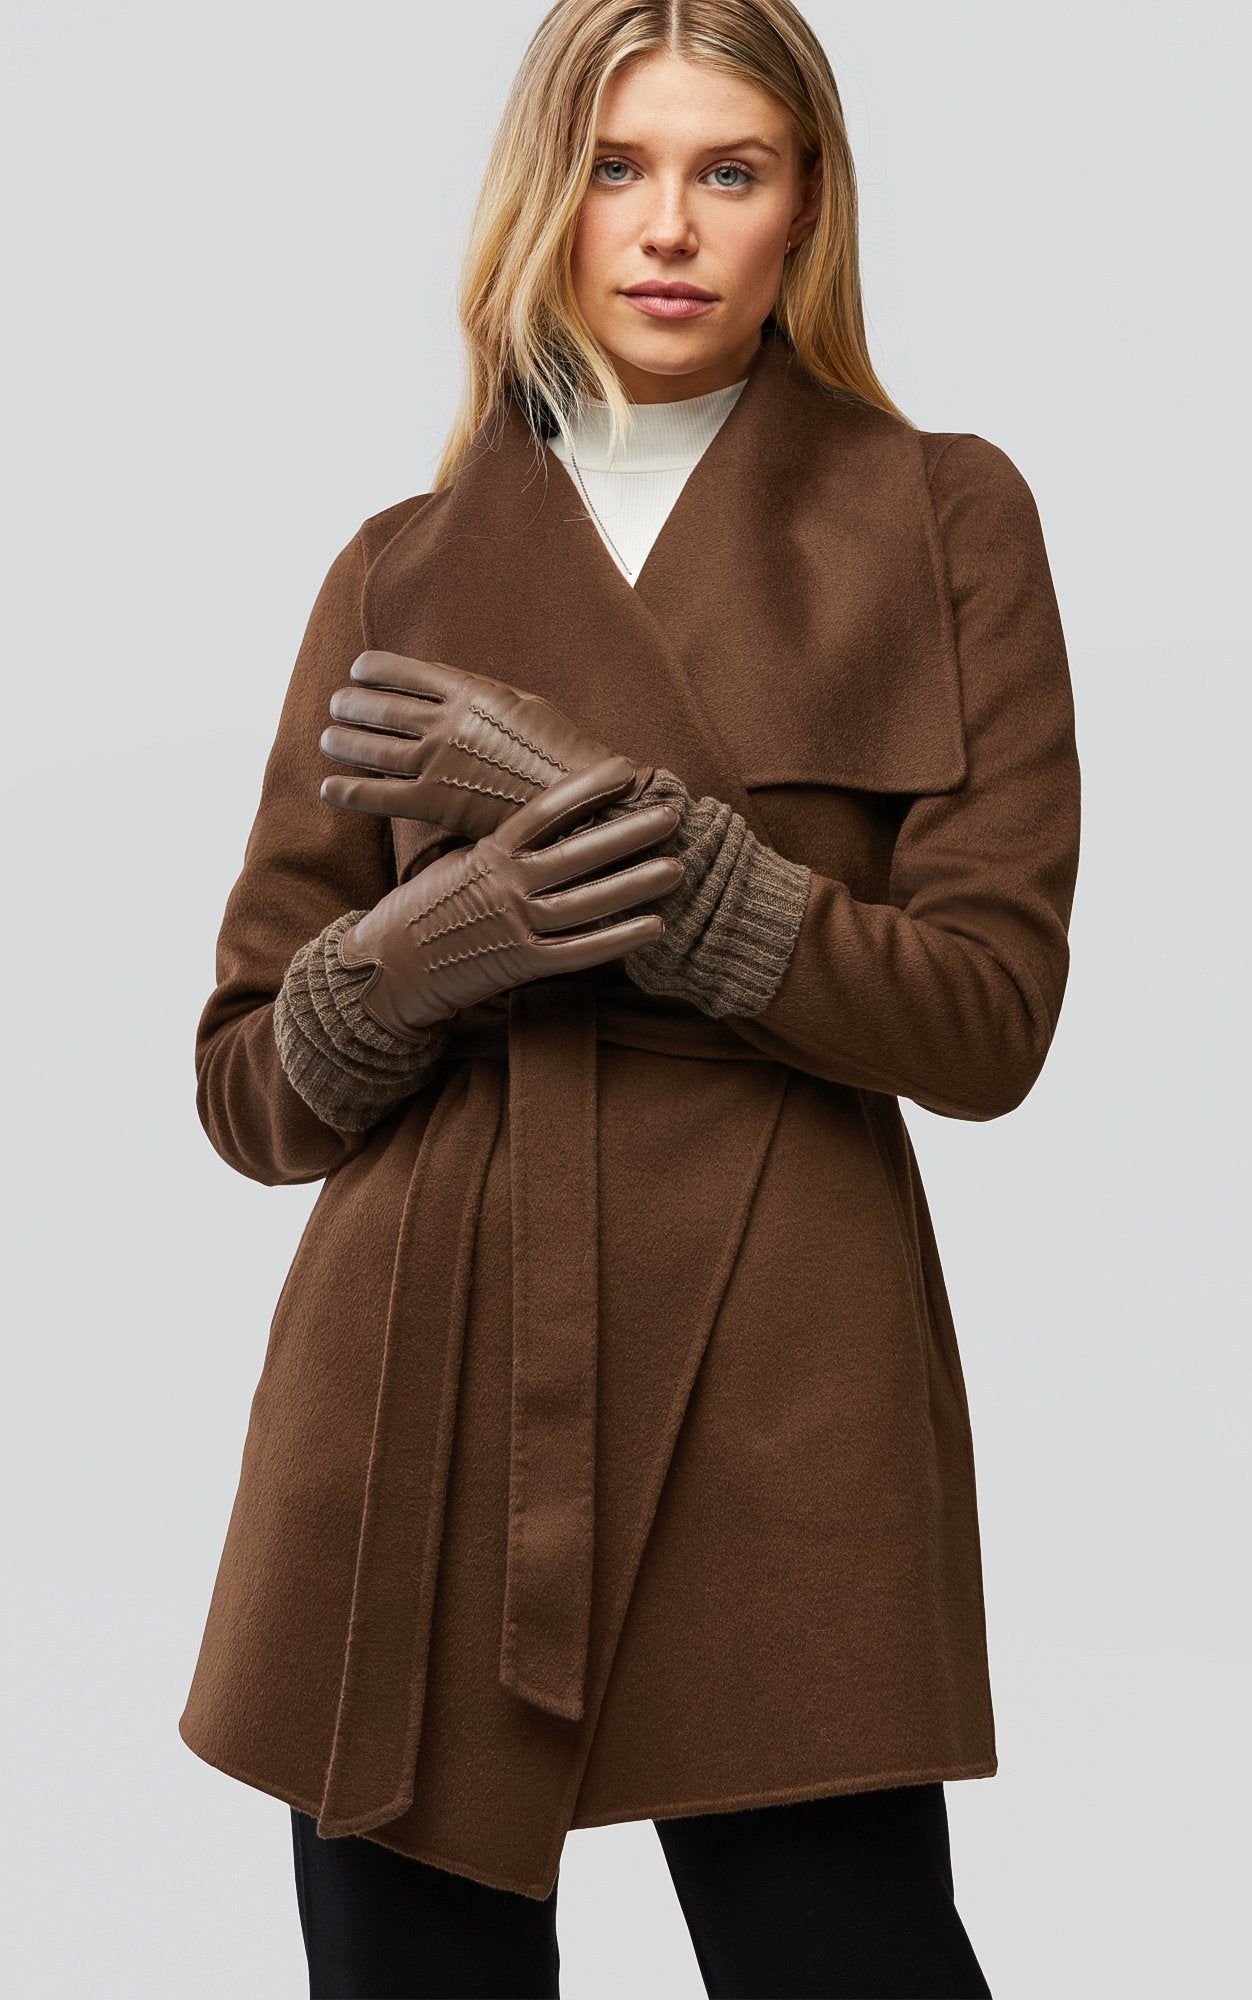 SOIA&KYO CARMEL-N - leather gloves with knit lining